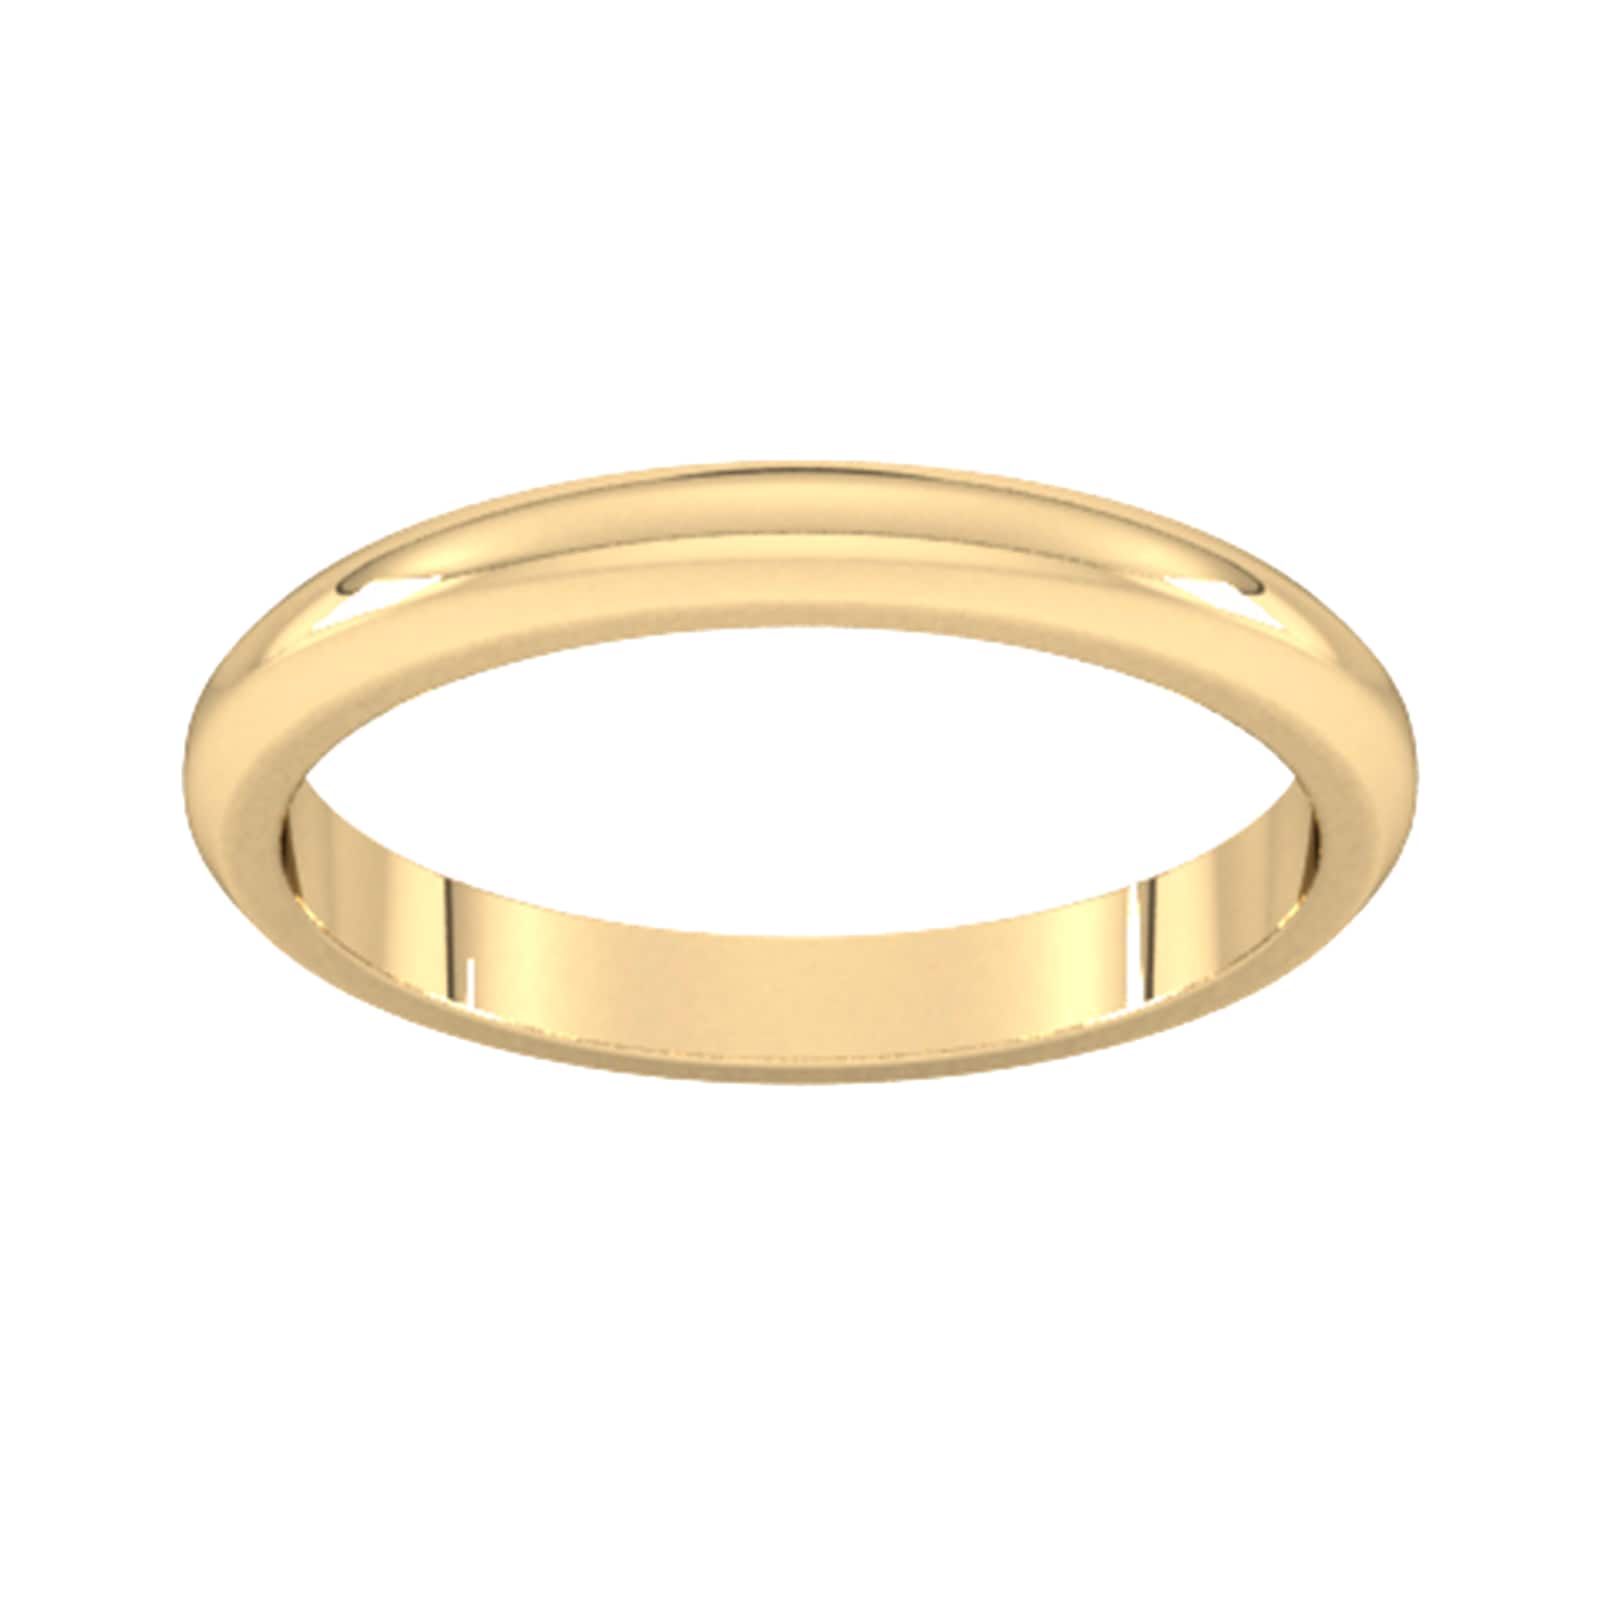 2.5mm D Shape Heavy Wedding Ring In 9 Carat Yellow Gold - Ring Size M